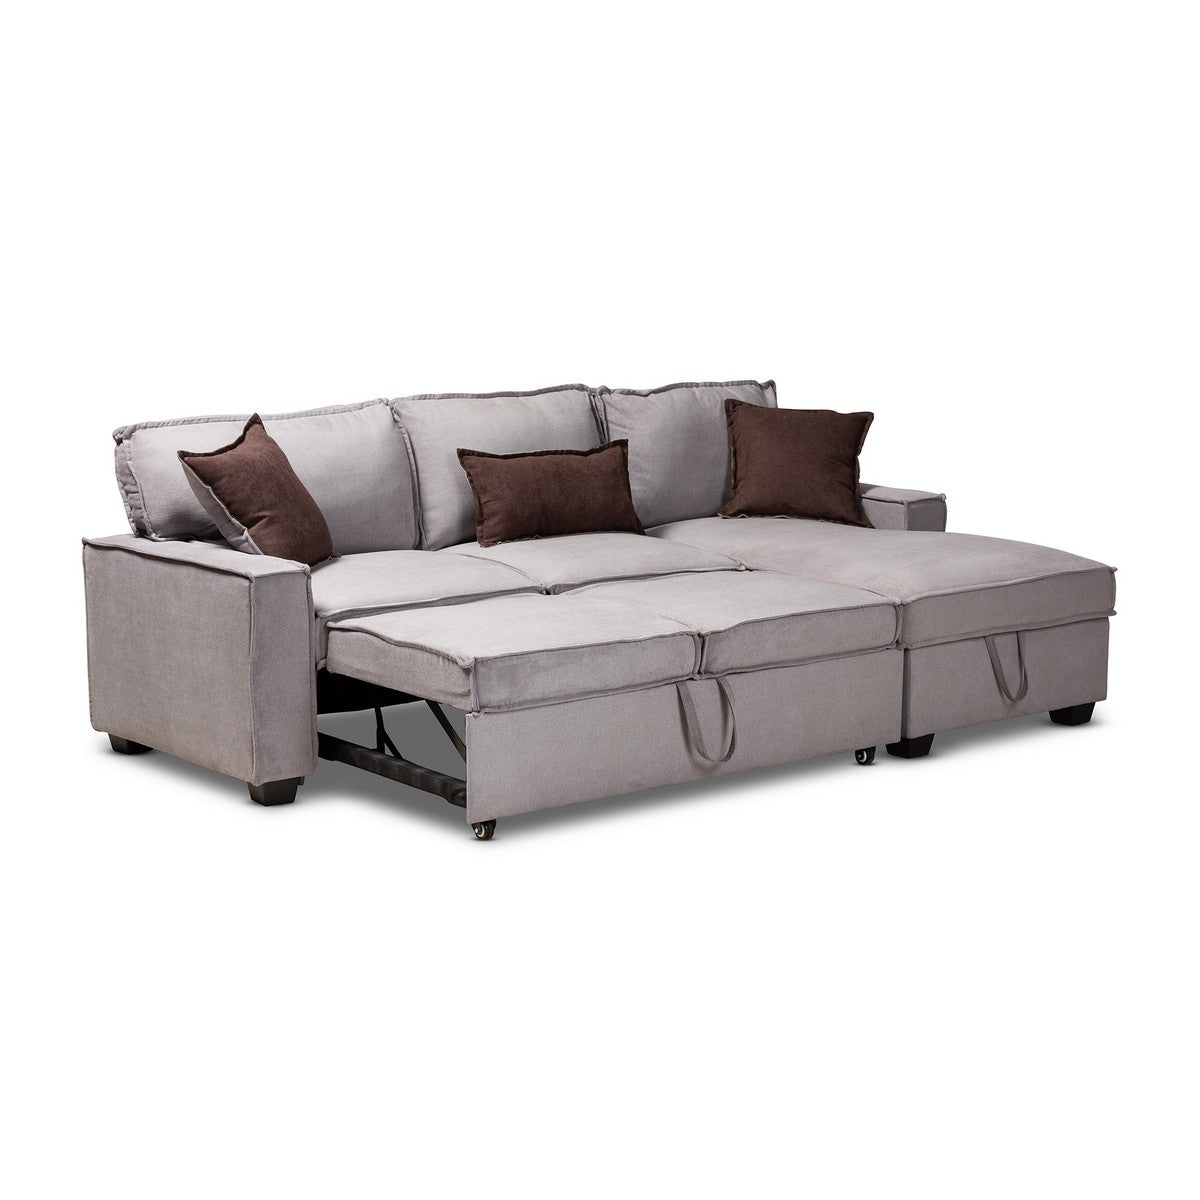 Baxton Studio Emile Modern and Contemporary Light Grey Fabric Upholstered Right Facing Storage Sectional Sofa with Pull-Out Bed Baxton Studio-sectionals-Minimal And Modern - 1